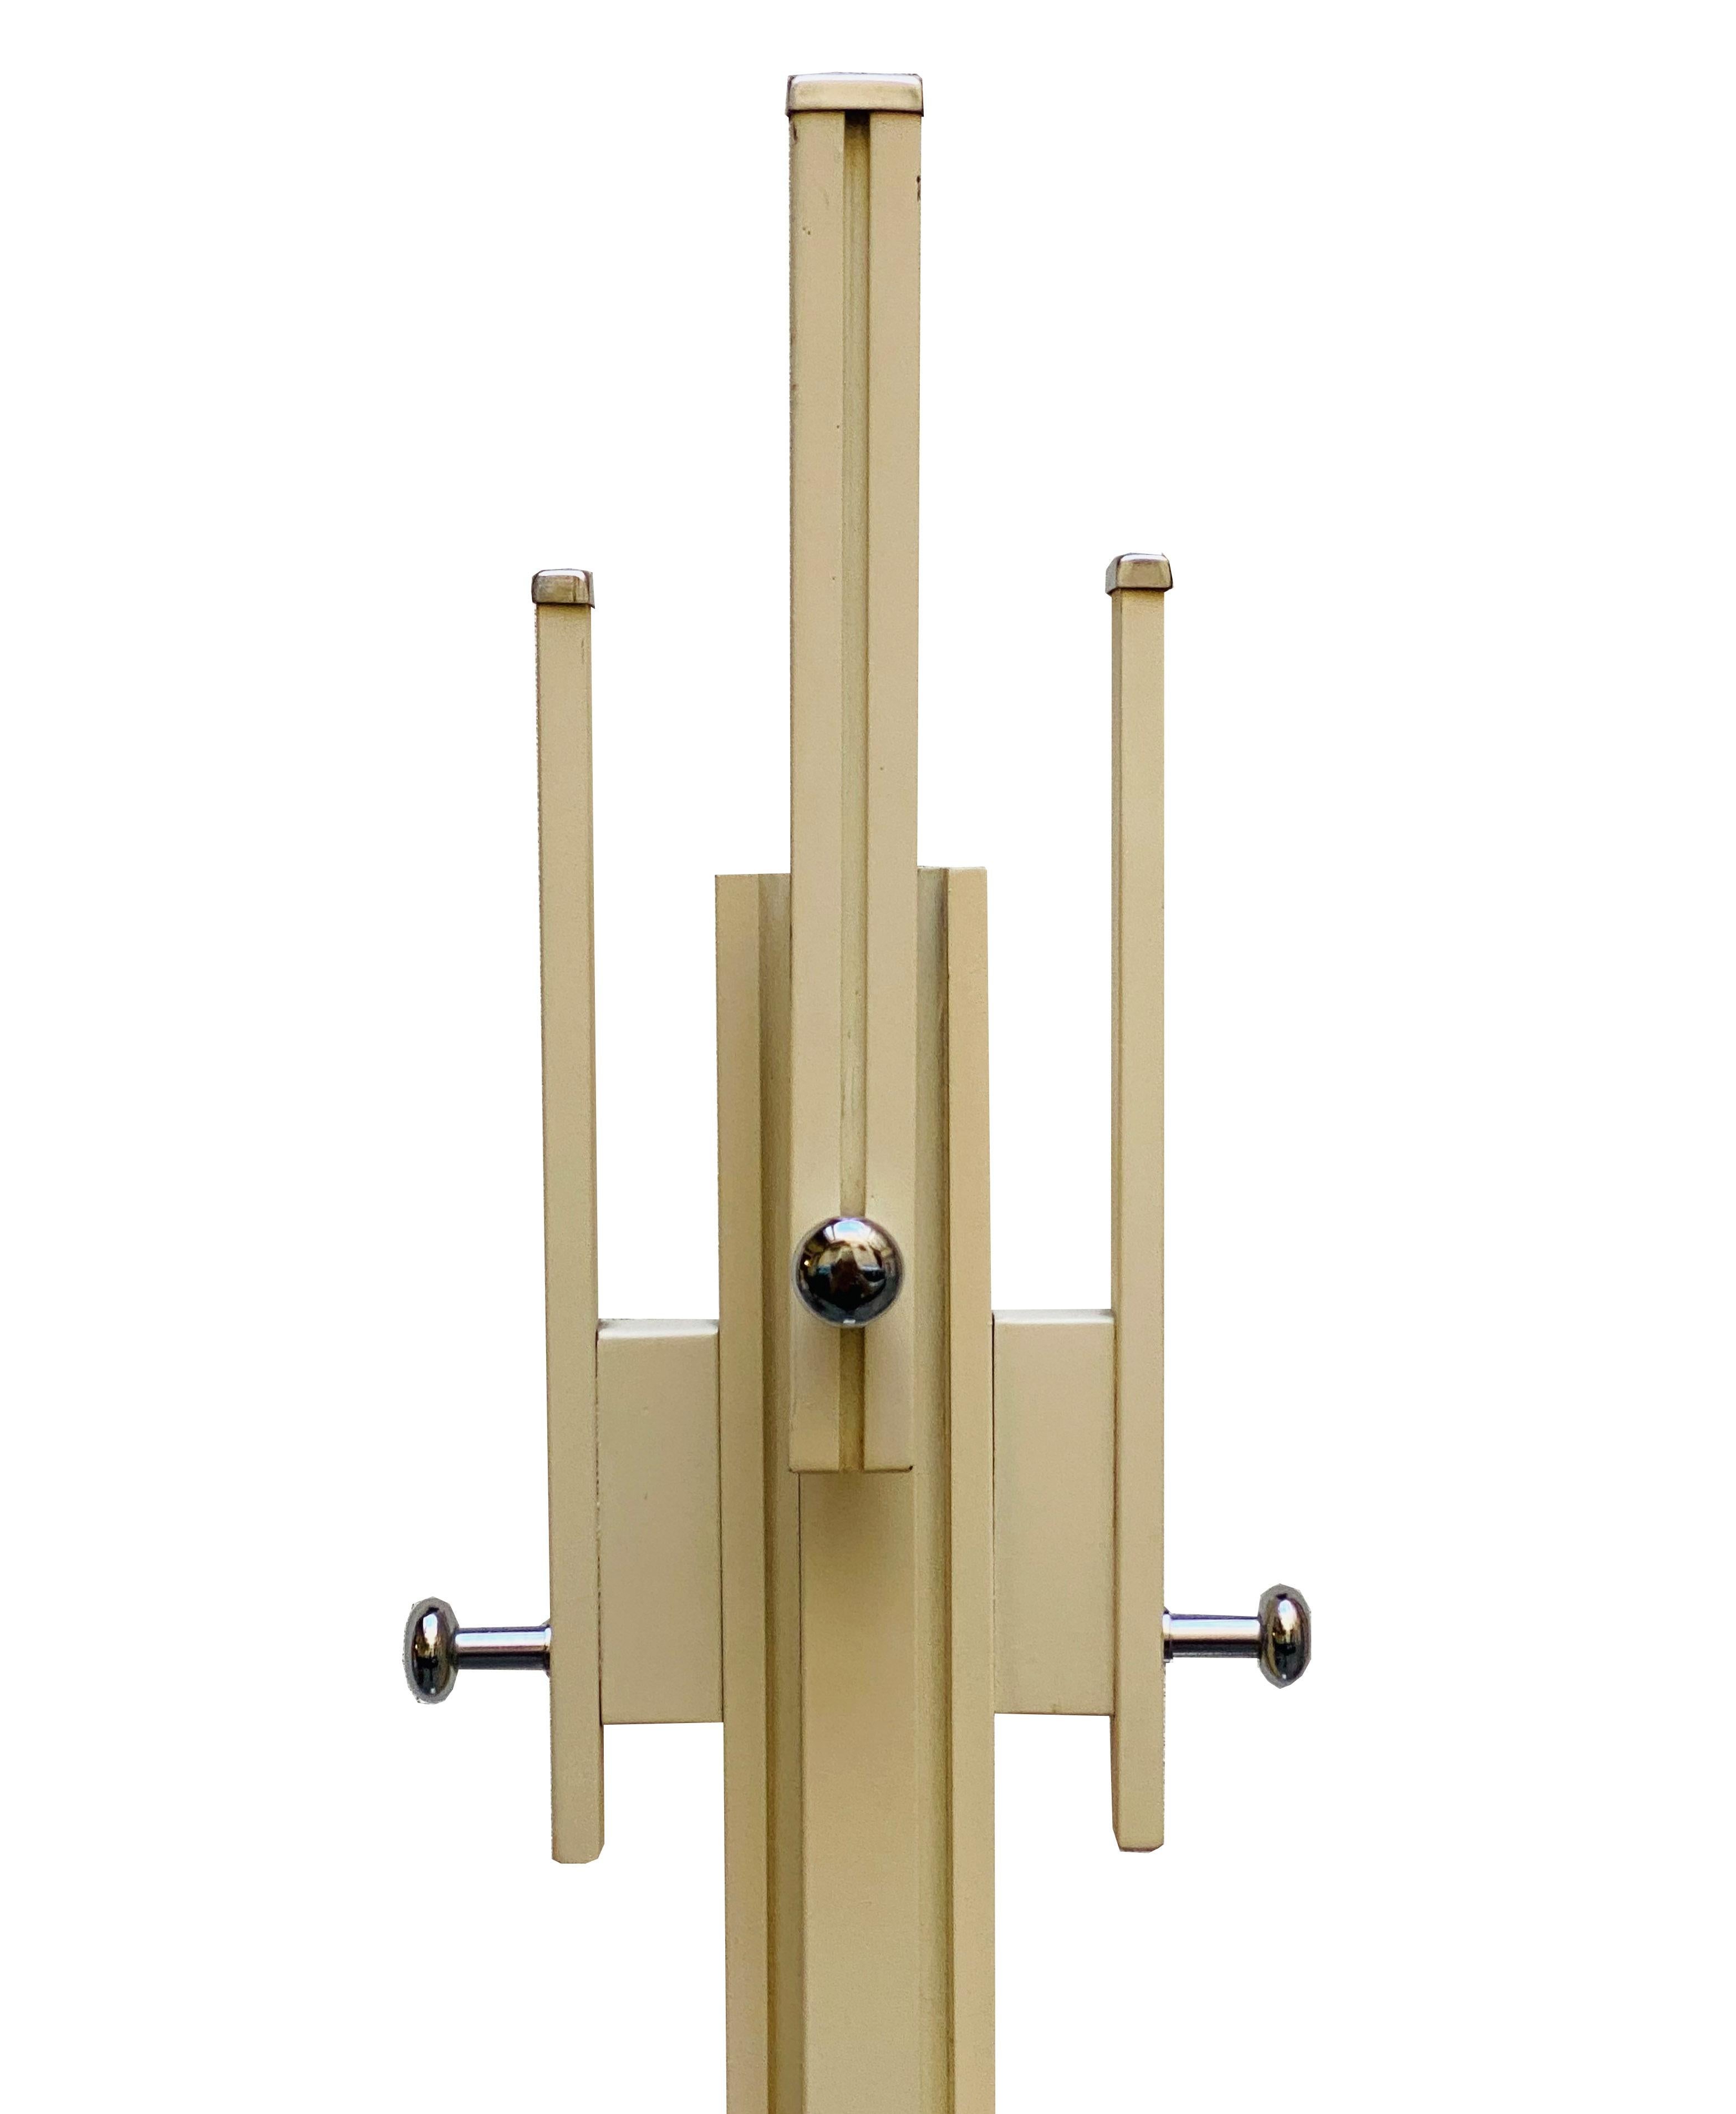 Coat stand produced by Fiarm in the 1960s to a design by Carlo de Carli.
Base in fibreglass and chrome-plated metal.
Stem and hangers in wood and chrome-plated metal.